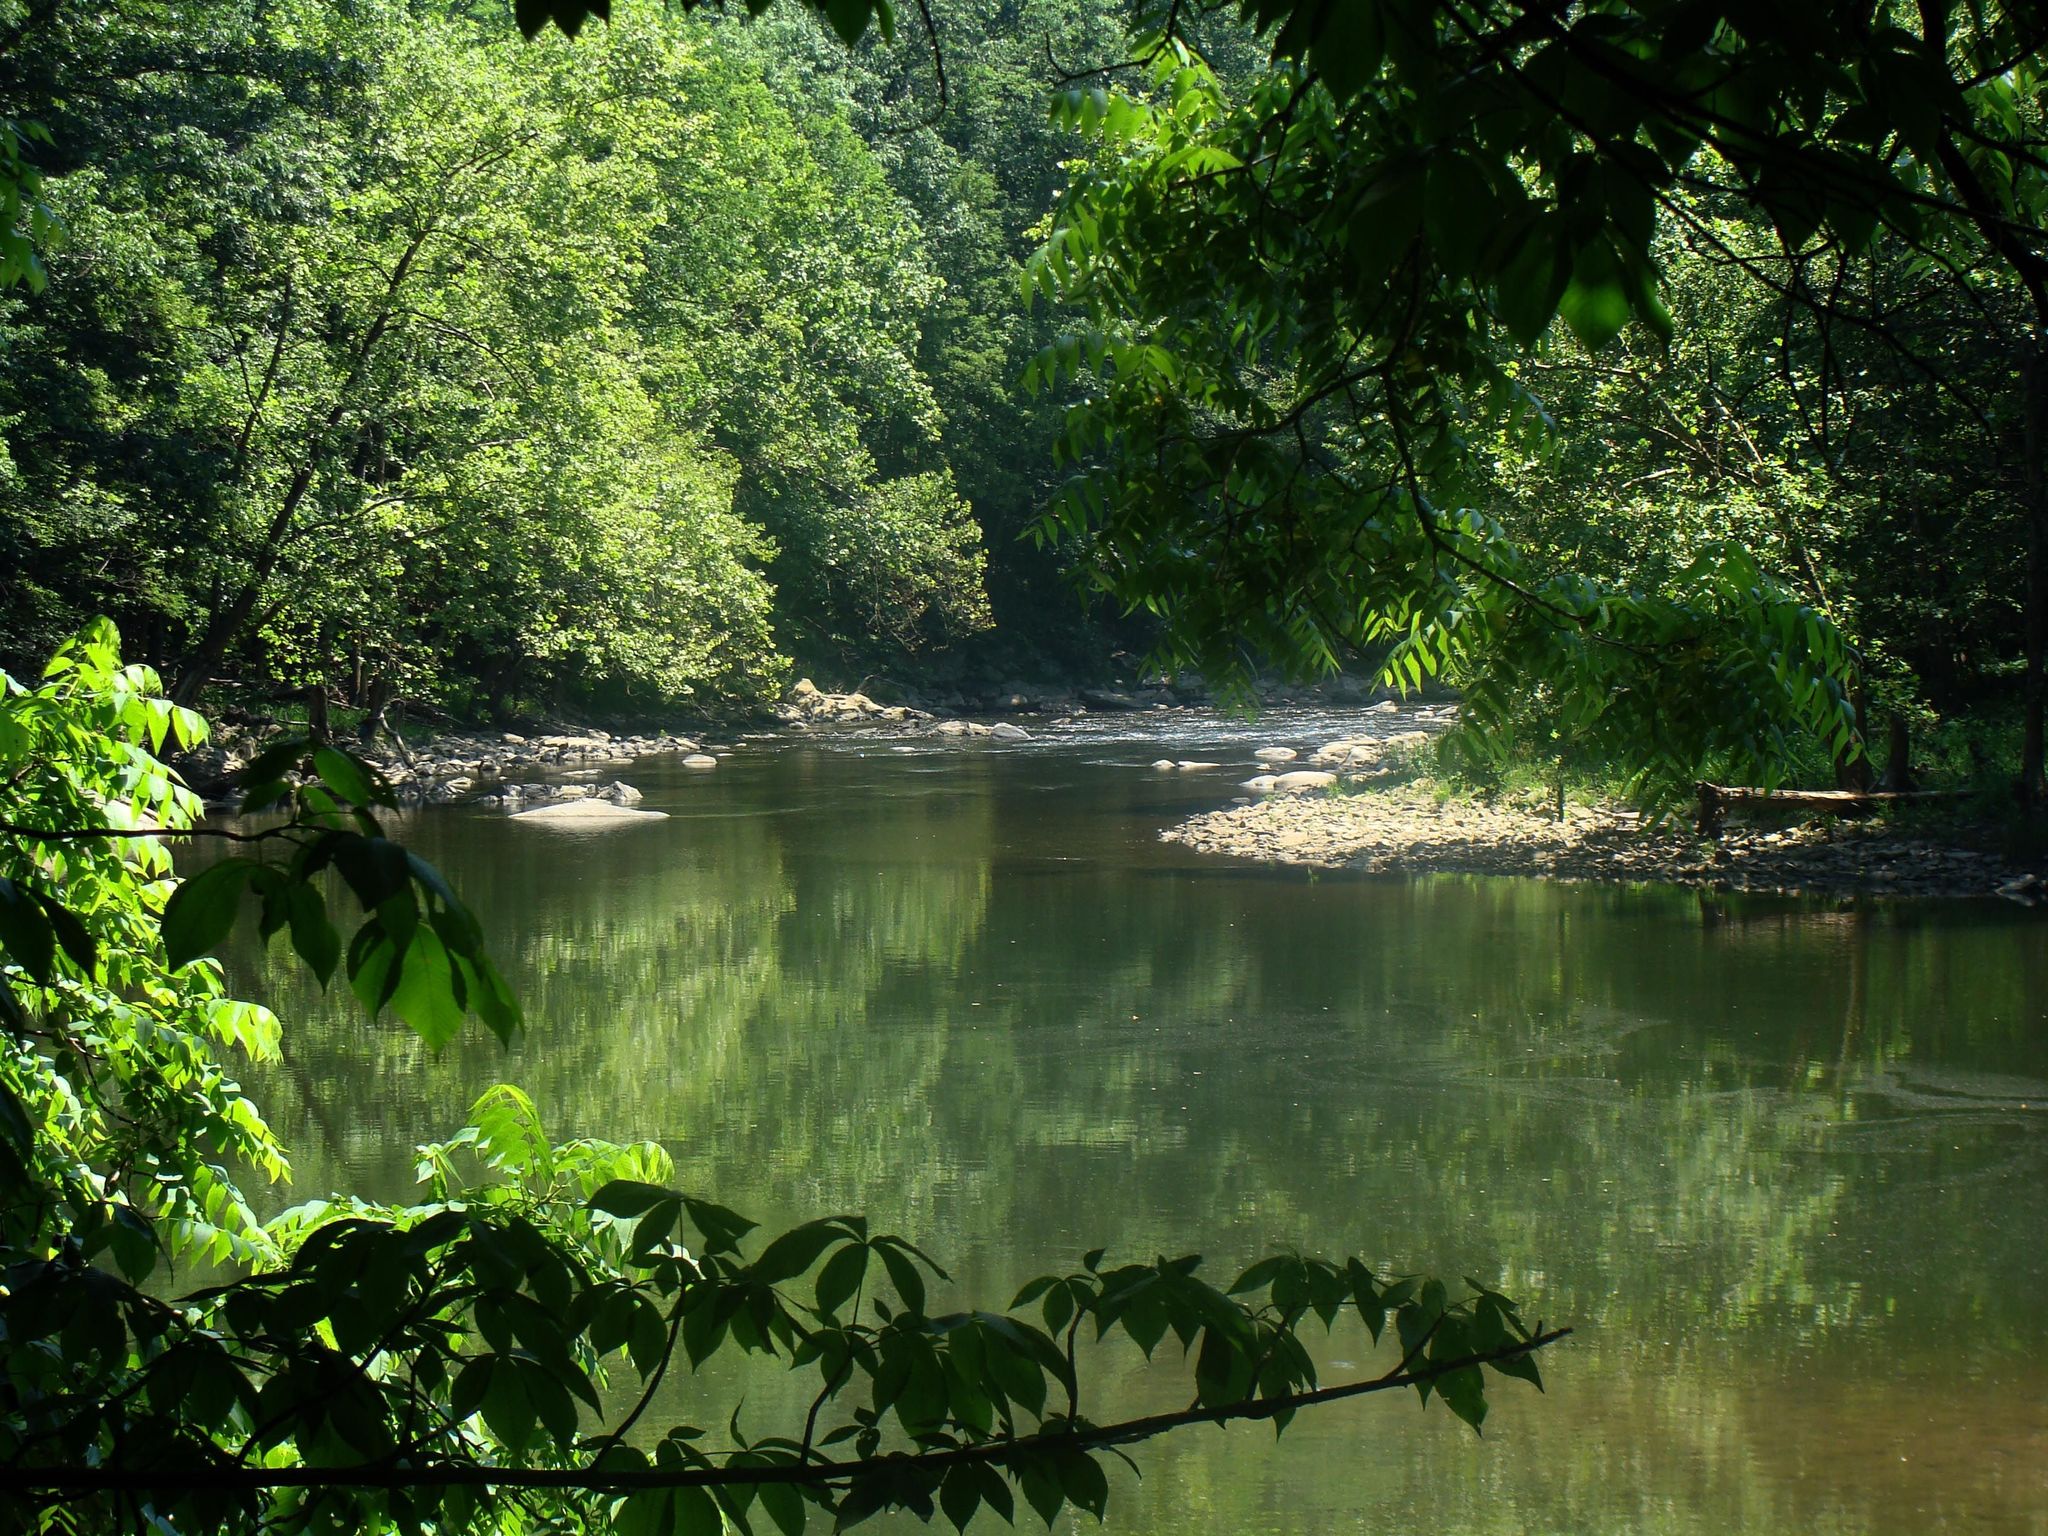 Bluestone National Scenic River offers a quiet getaway.